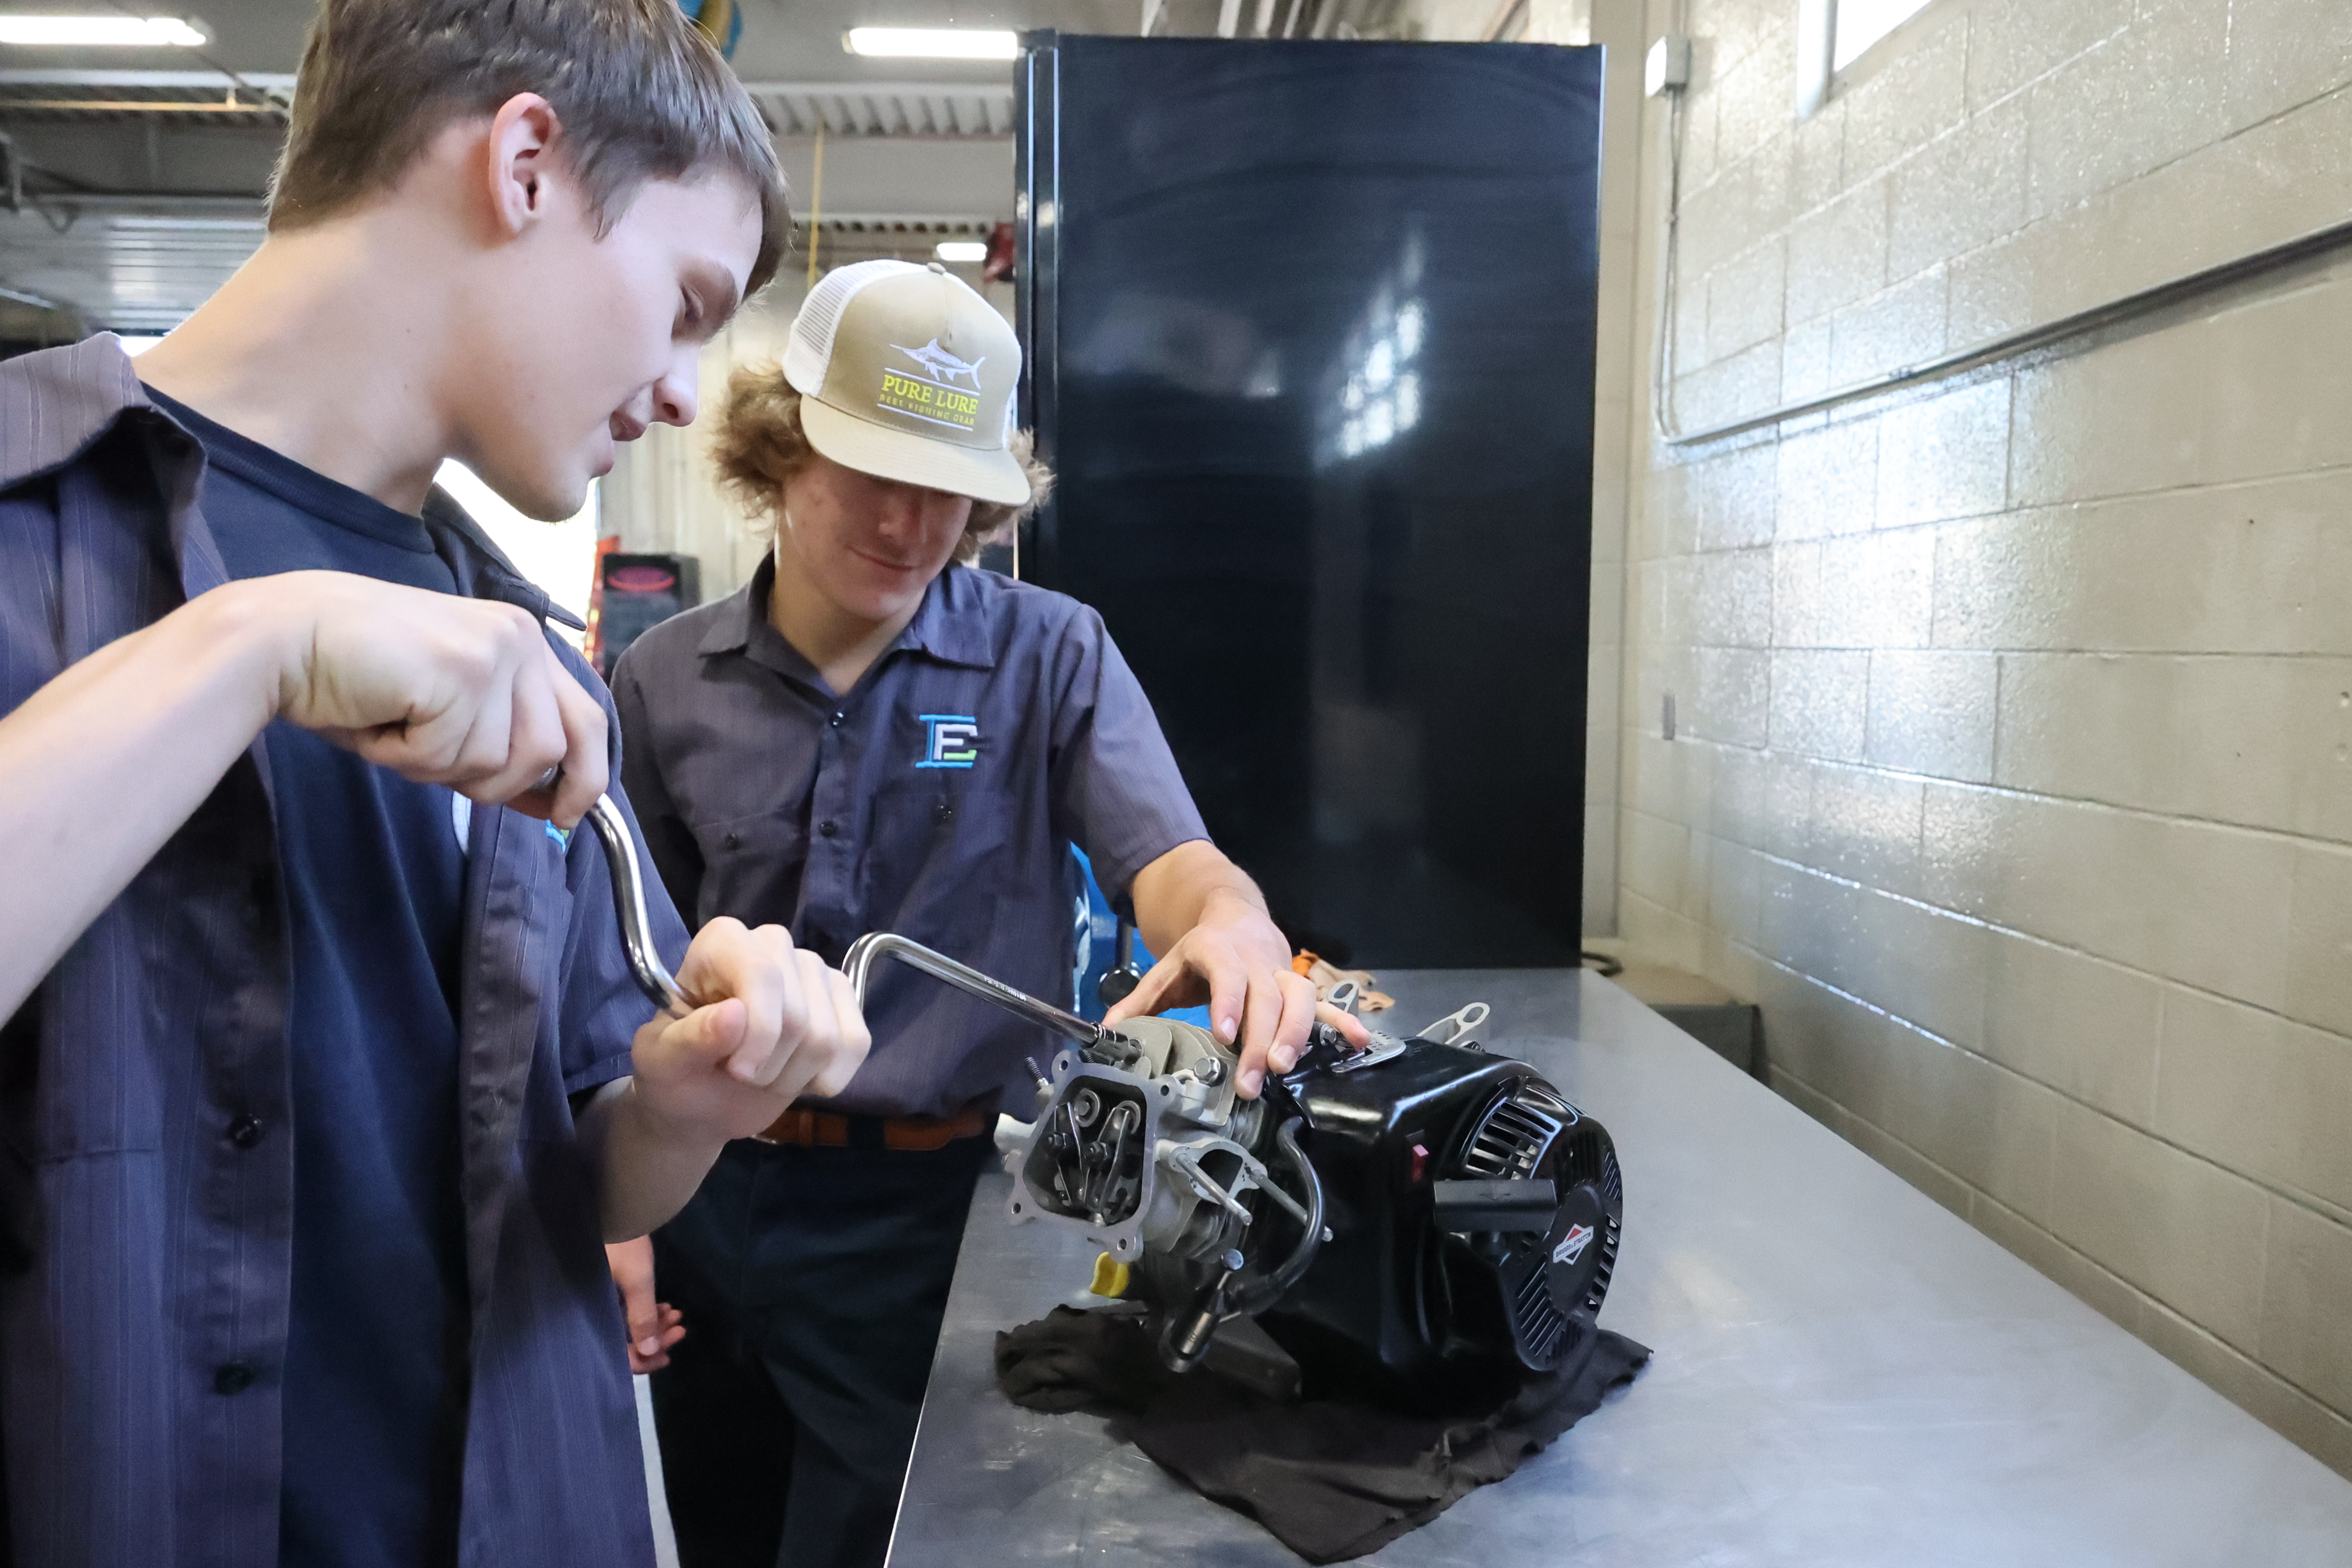 Two White, male students are working on an engine with a crank tool